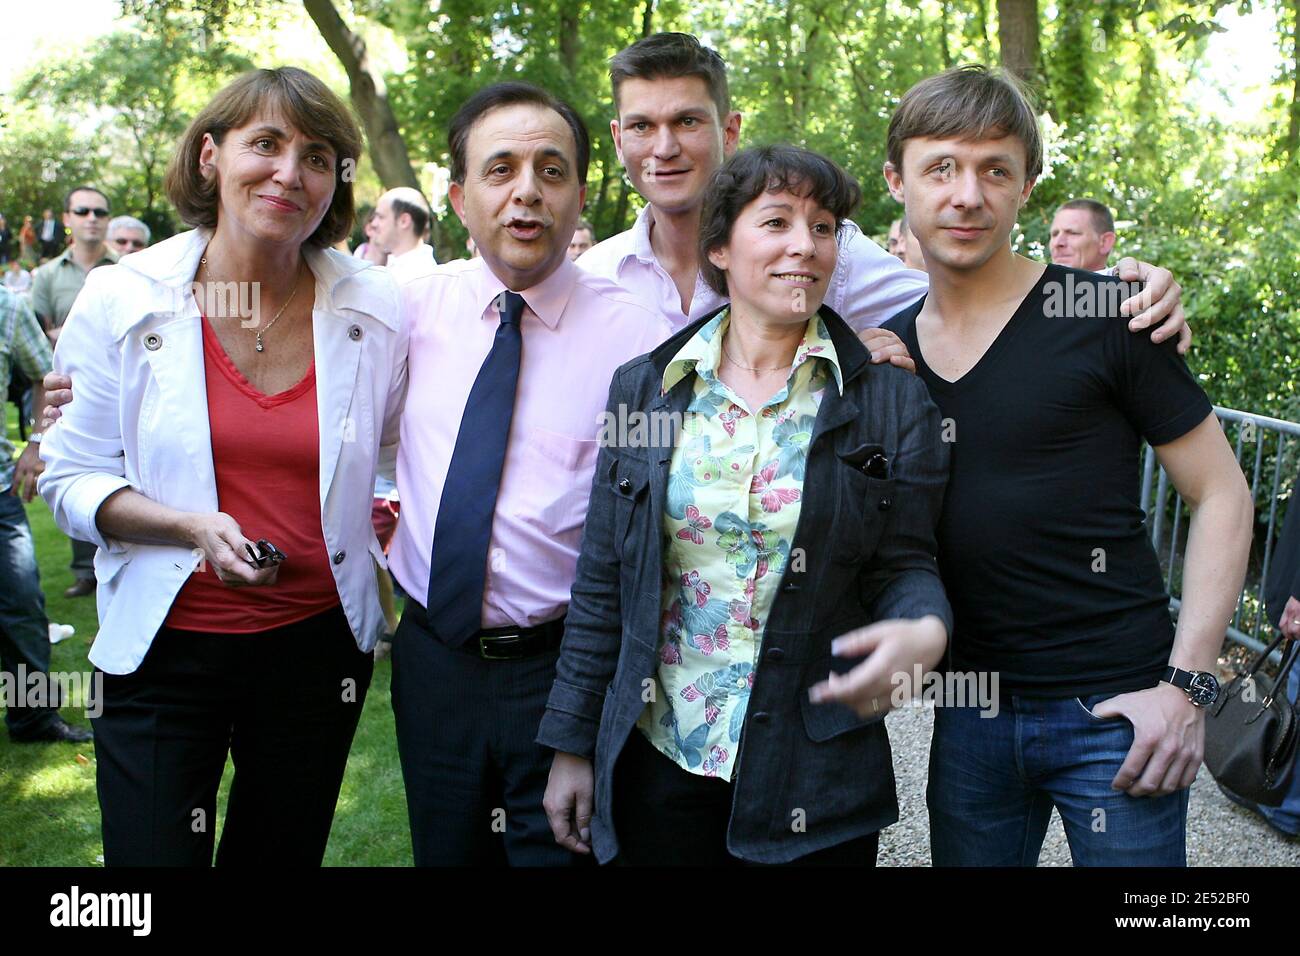 French Culture Minister Christine Albanel, Junior Minister for Relations  with Parliament Roger Karoutchi, DJ of Radio FG, Junior Minister for Urban  Affairs Fadela Amara and DJ Martin Solveig attend the garden of